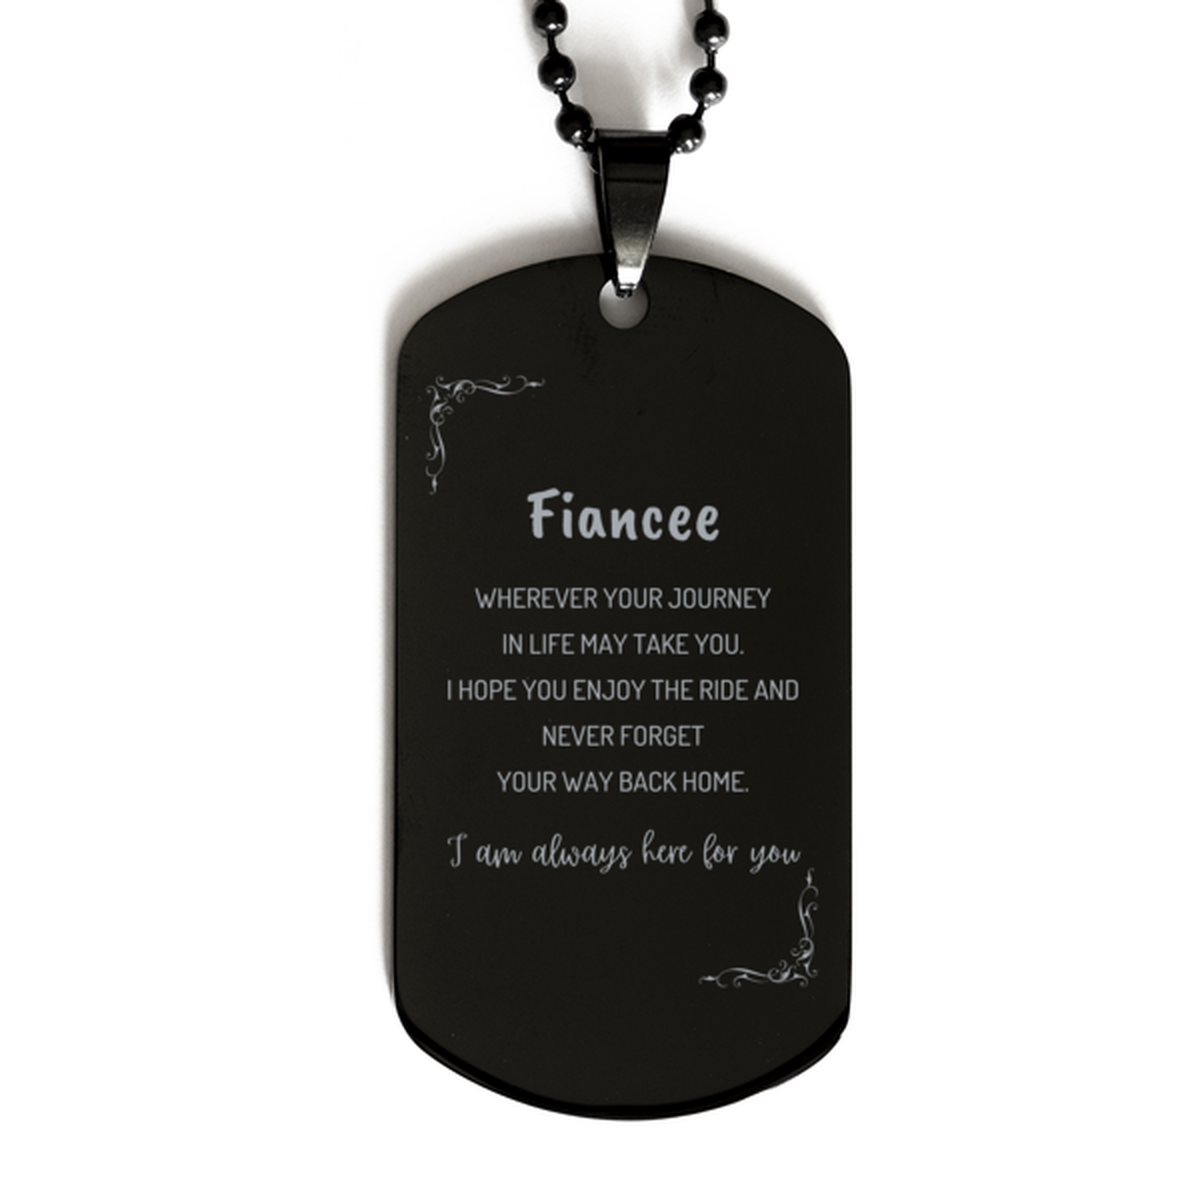 Fiancee wherever your journey in life may take you, I am always here for you Fiancee Black Dog Tag, Awesome Christmas Gifts For Fiancee, Fiancee Birthday Gifts for Men Women Family Loved One